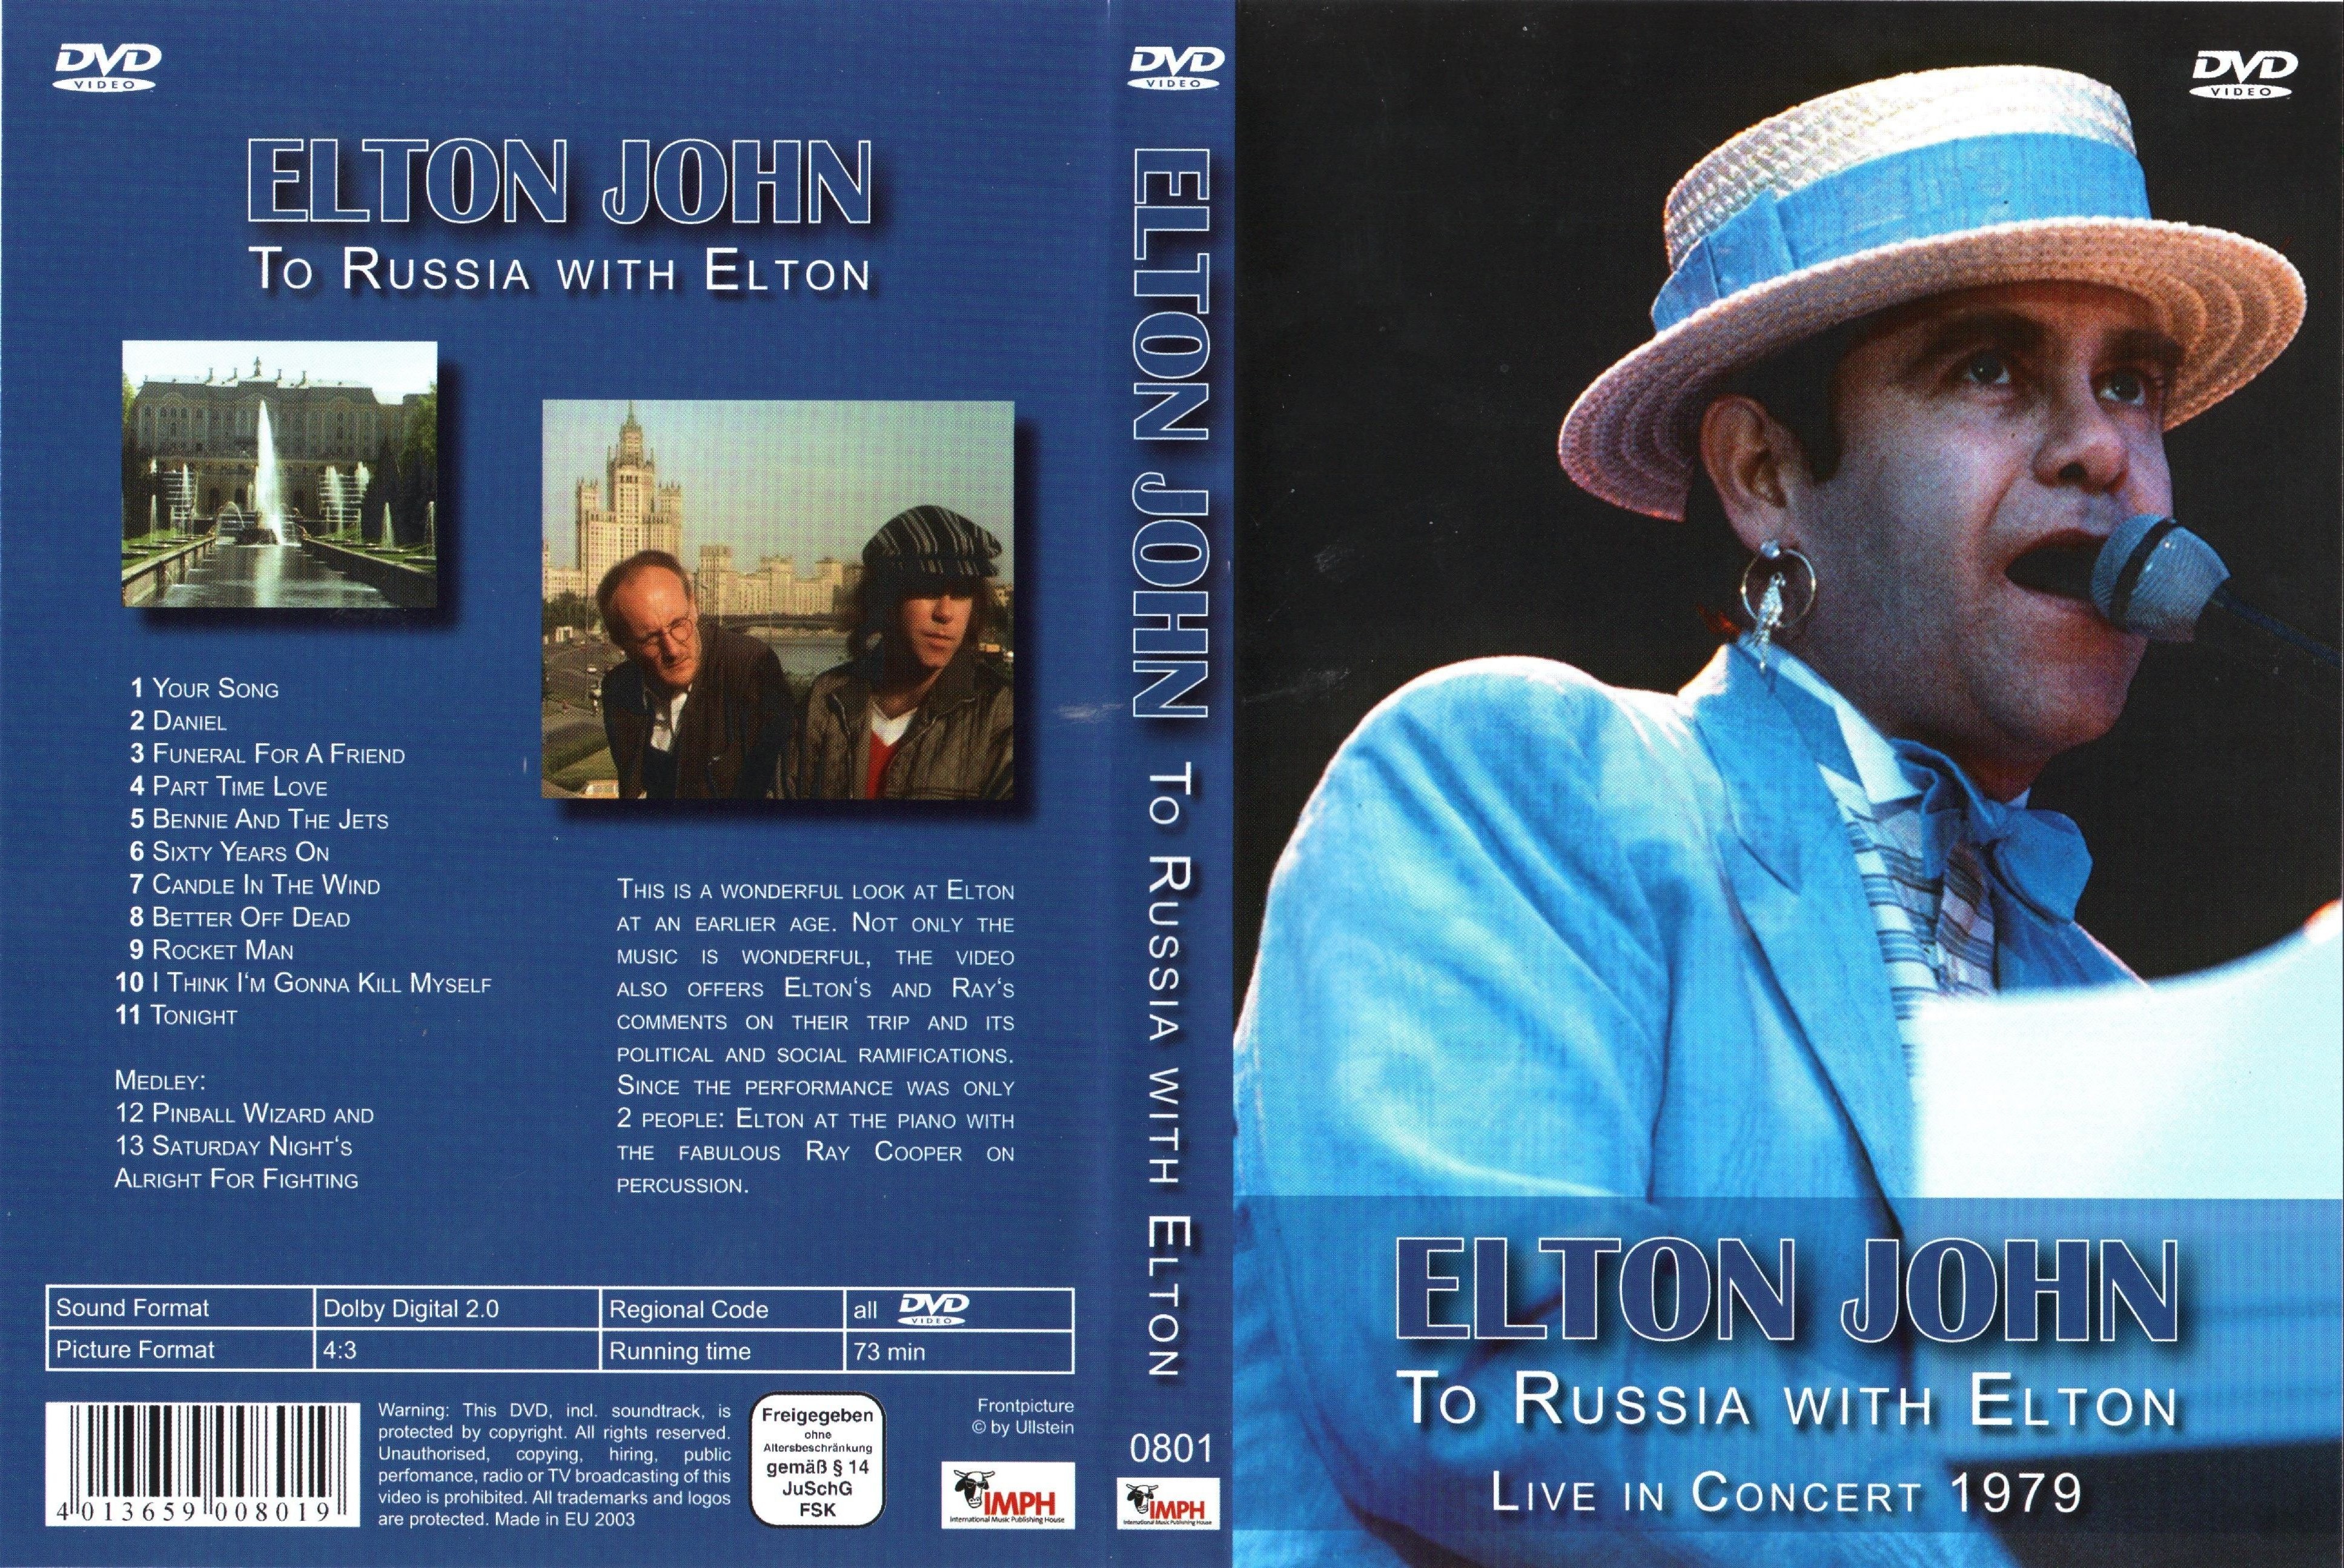 Jaquette DVD Elton John to Russia with Elton live in concert 1979